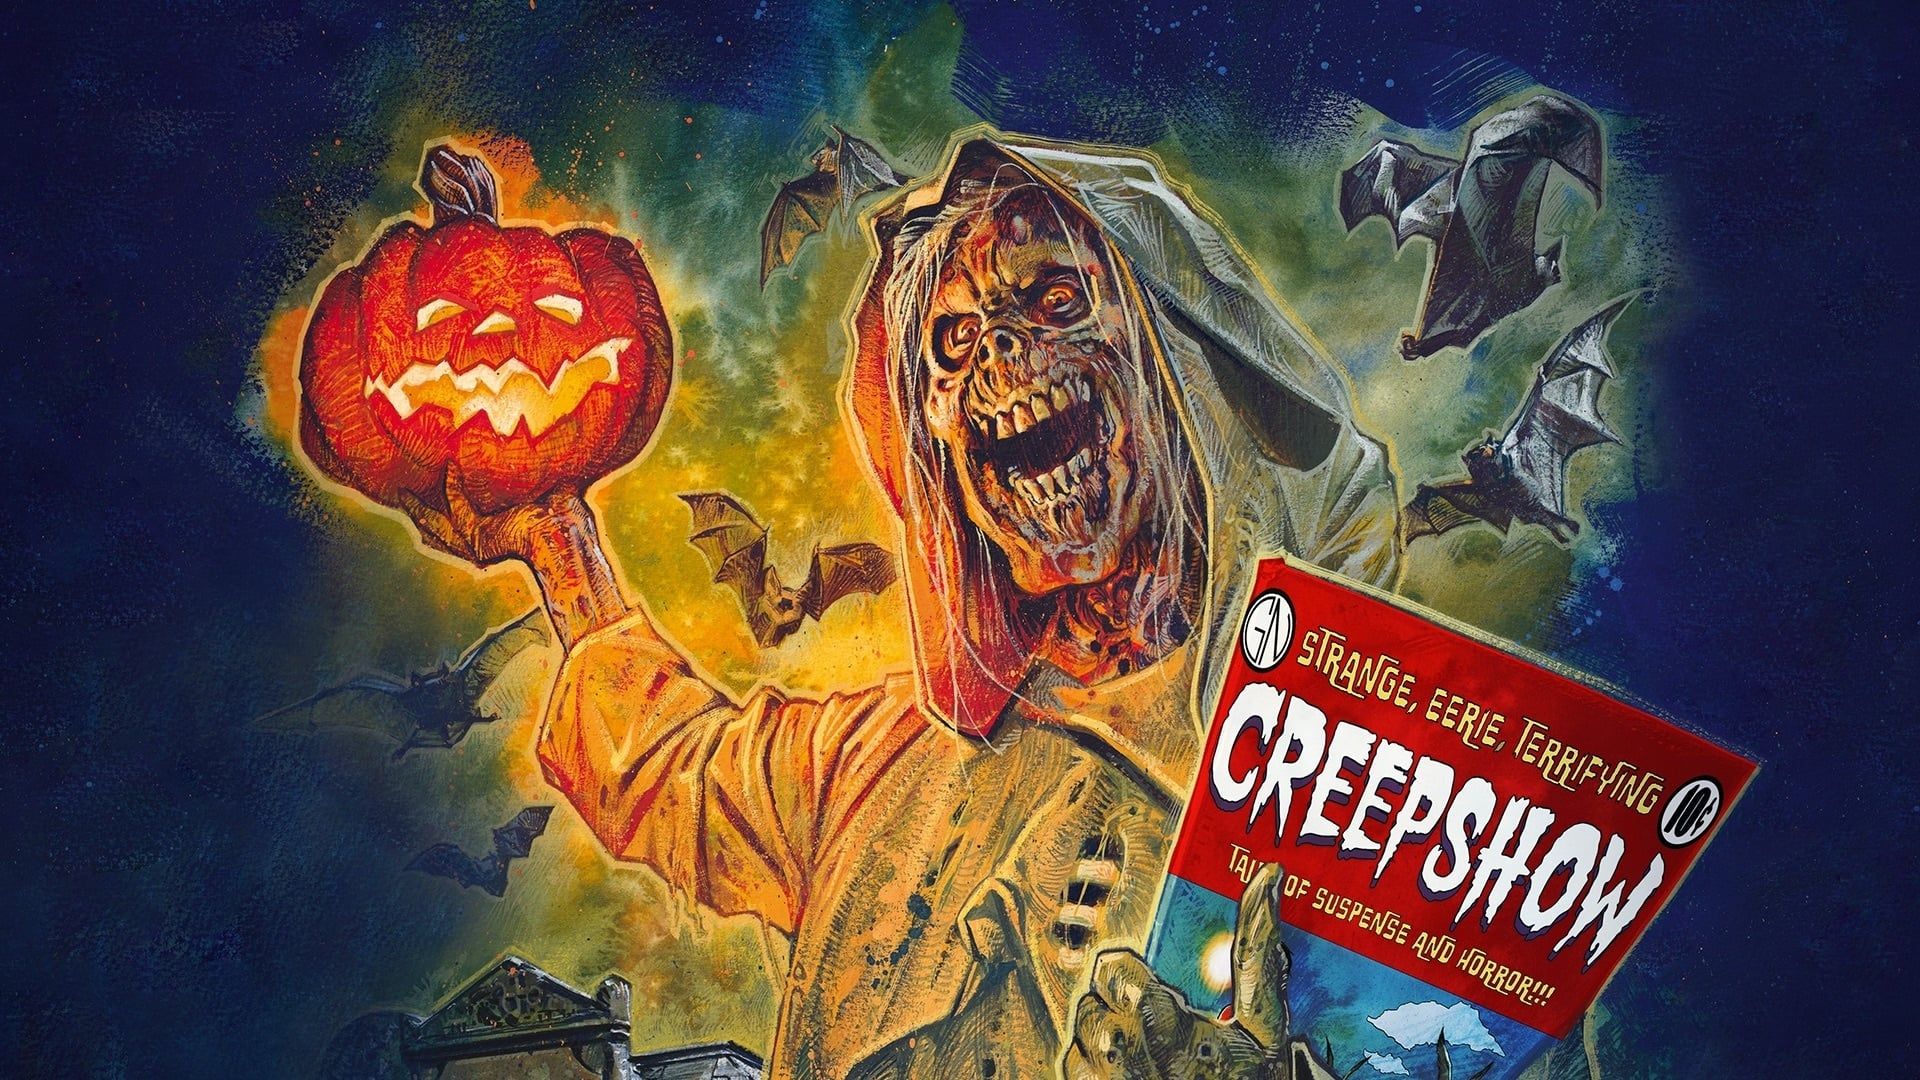 A Creepshow Animated Special: Survivor Type/Twittering from the Circus of the Dead Backdrop